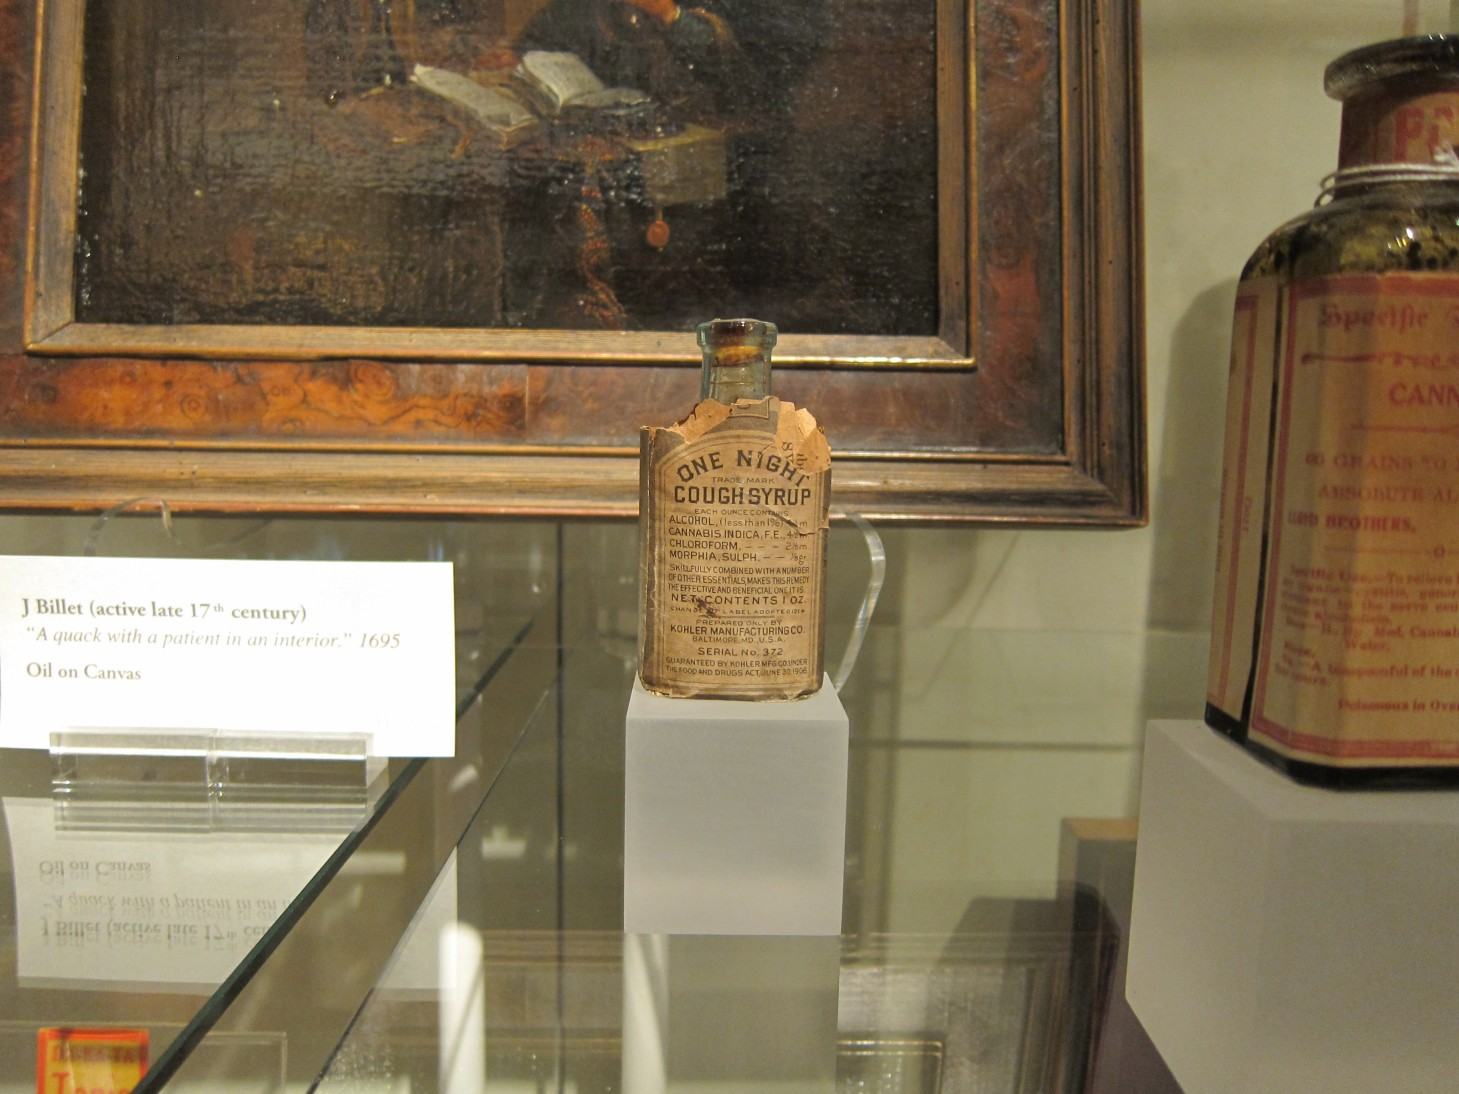 Obrázek cough syrup in museum